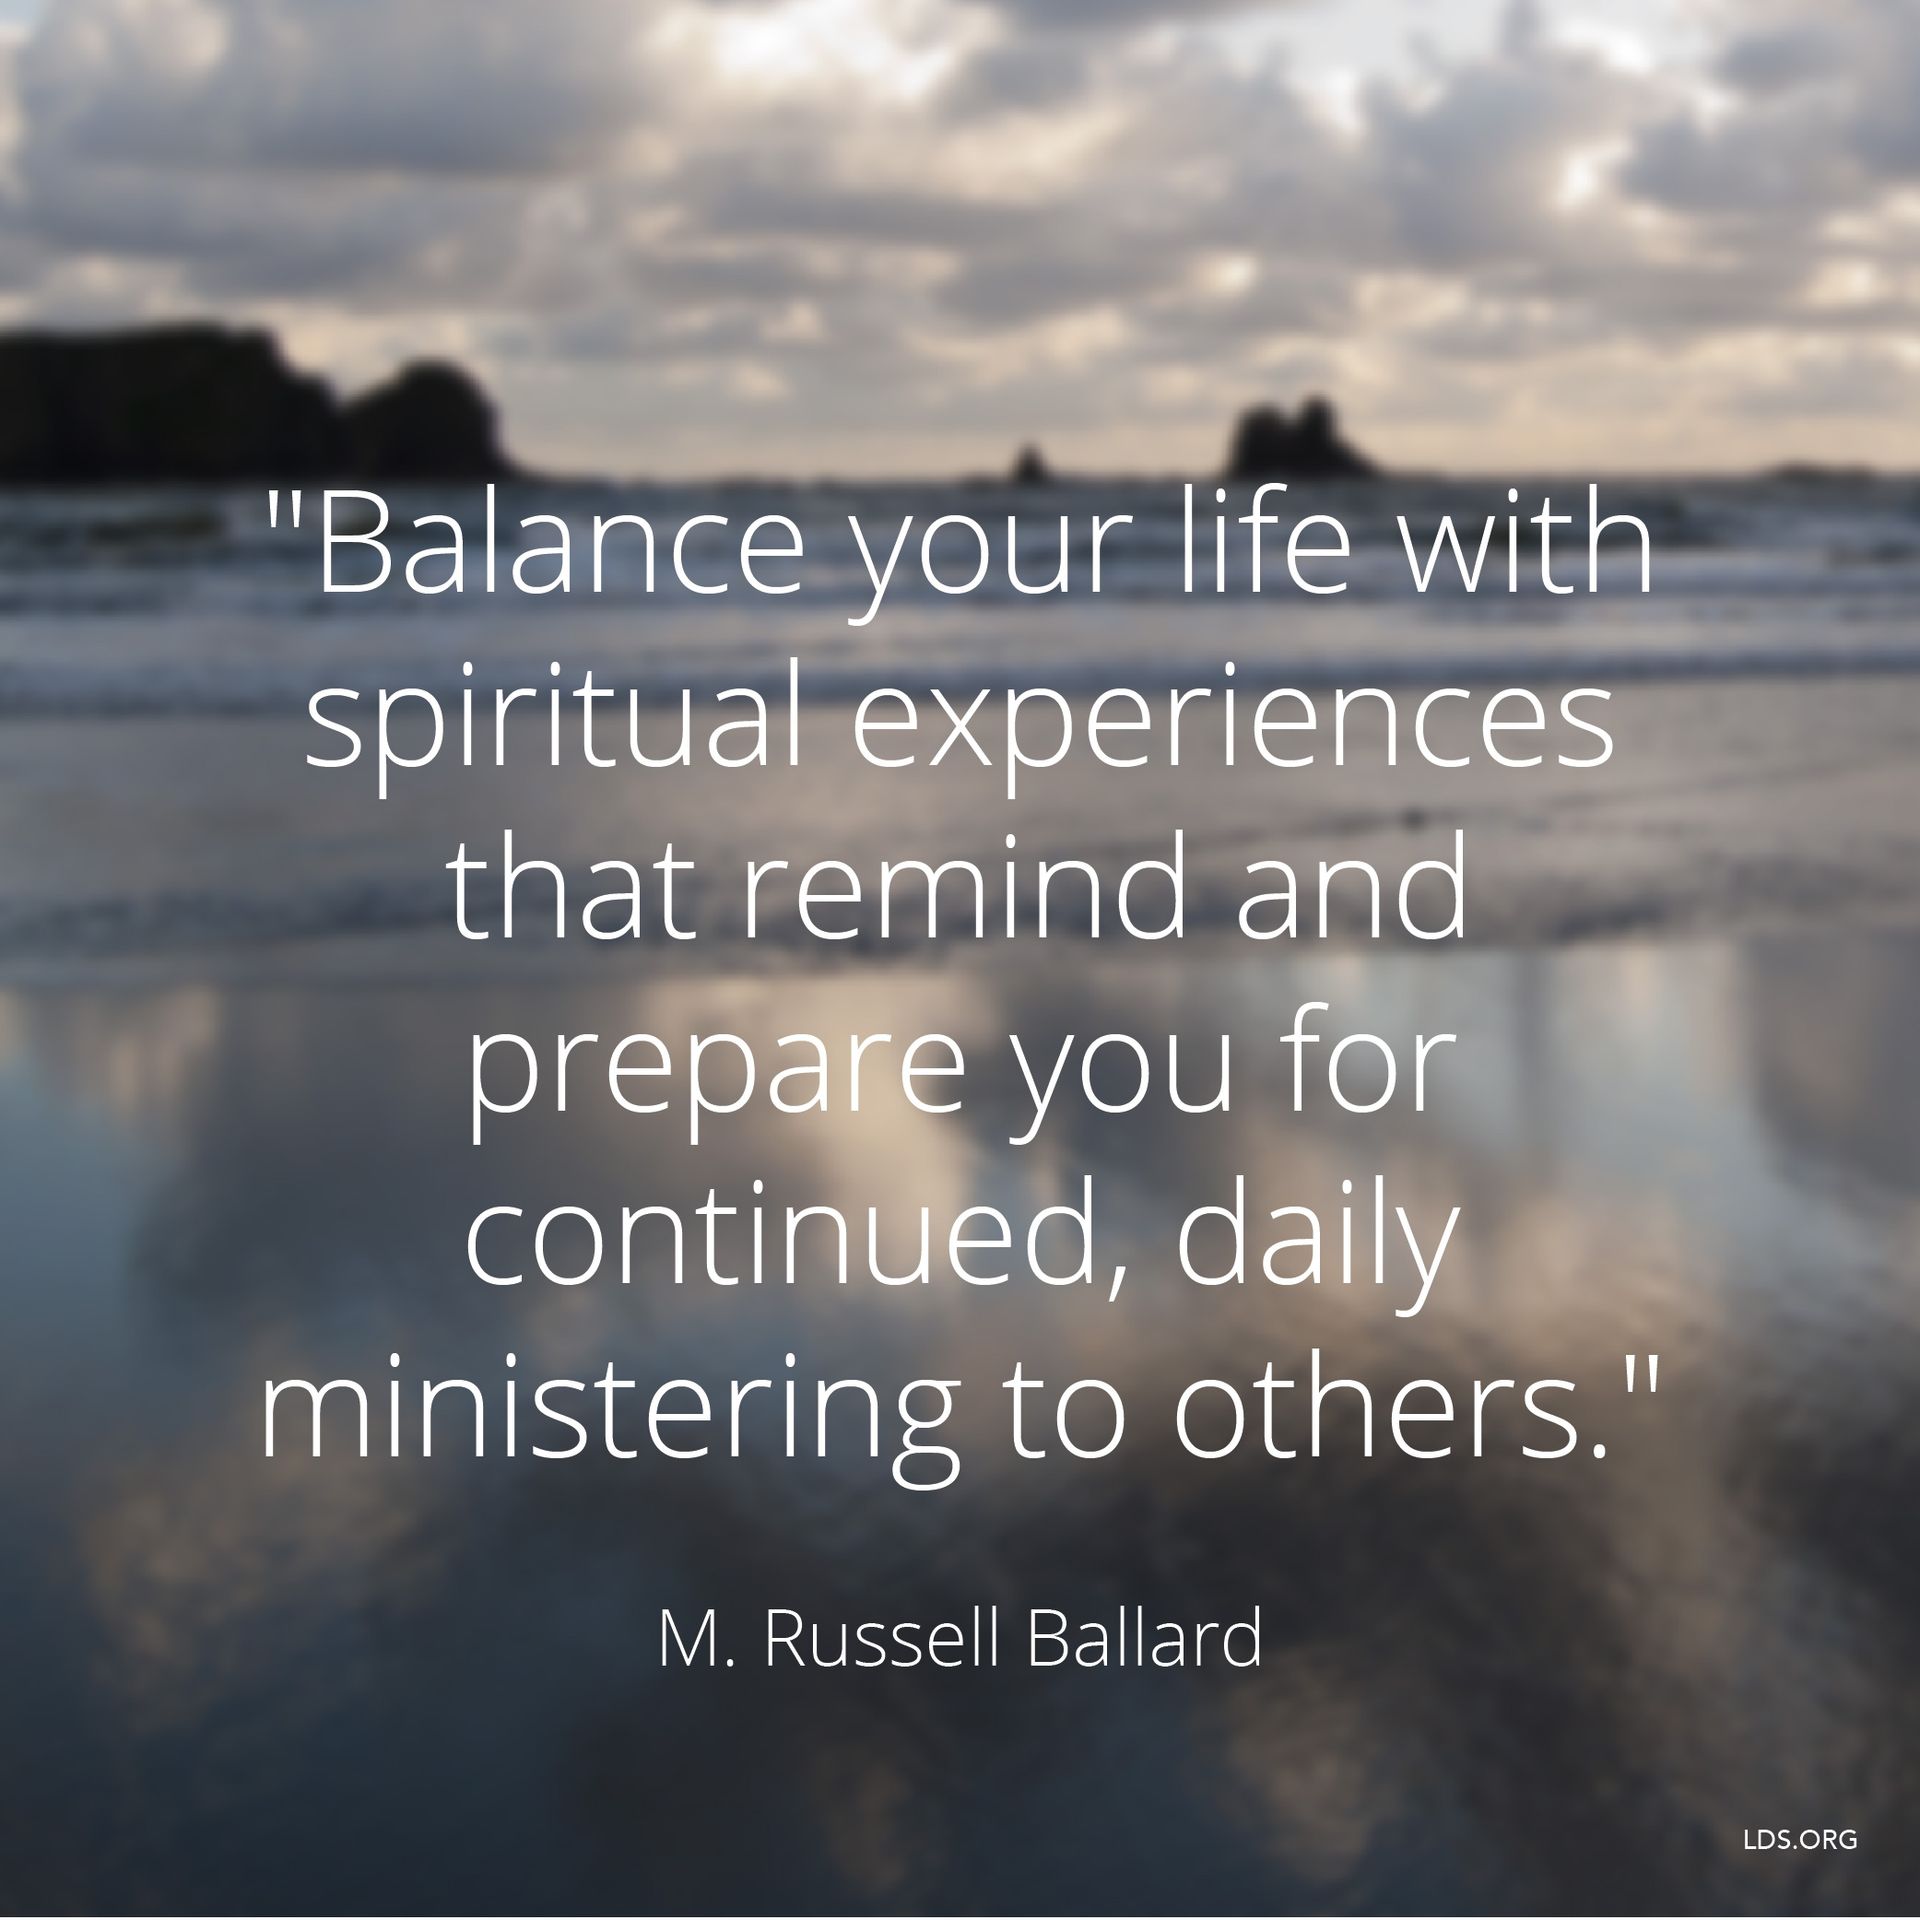 “Balance your life with spiritual experiences that remind and prepare you for continued, daily ministering to others.”—Elder M. Russell Ballard, “The Greatest Generation of Young Adults” © undefined ipCode 1.